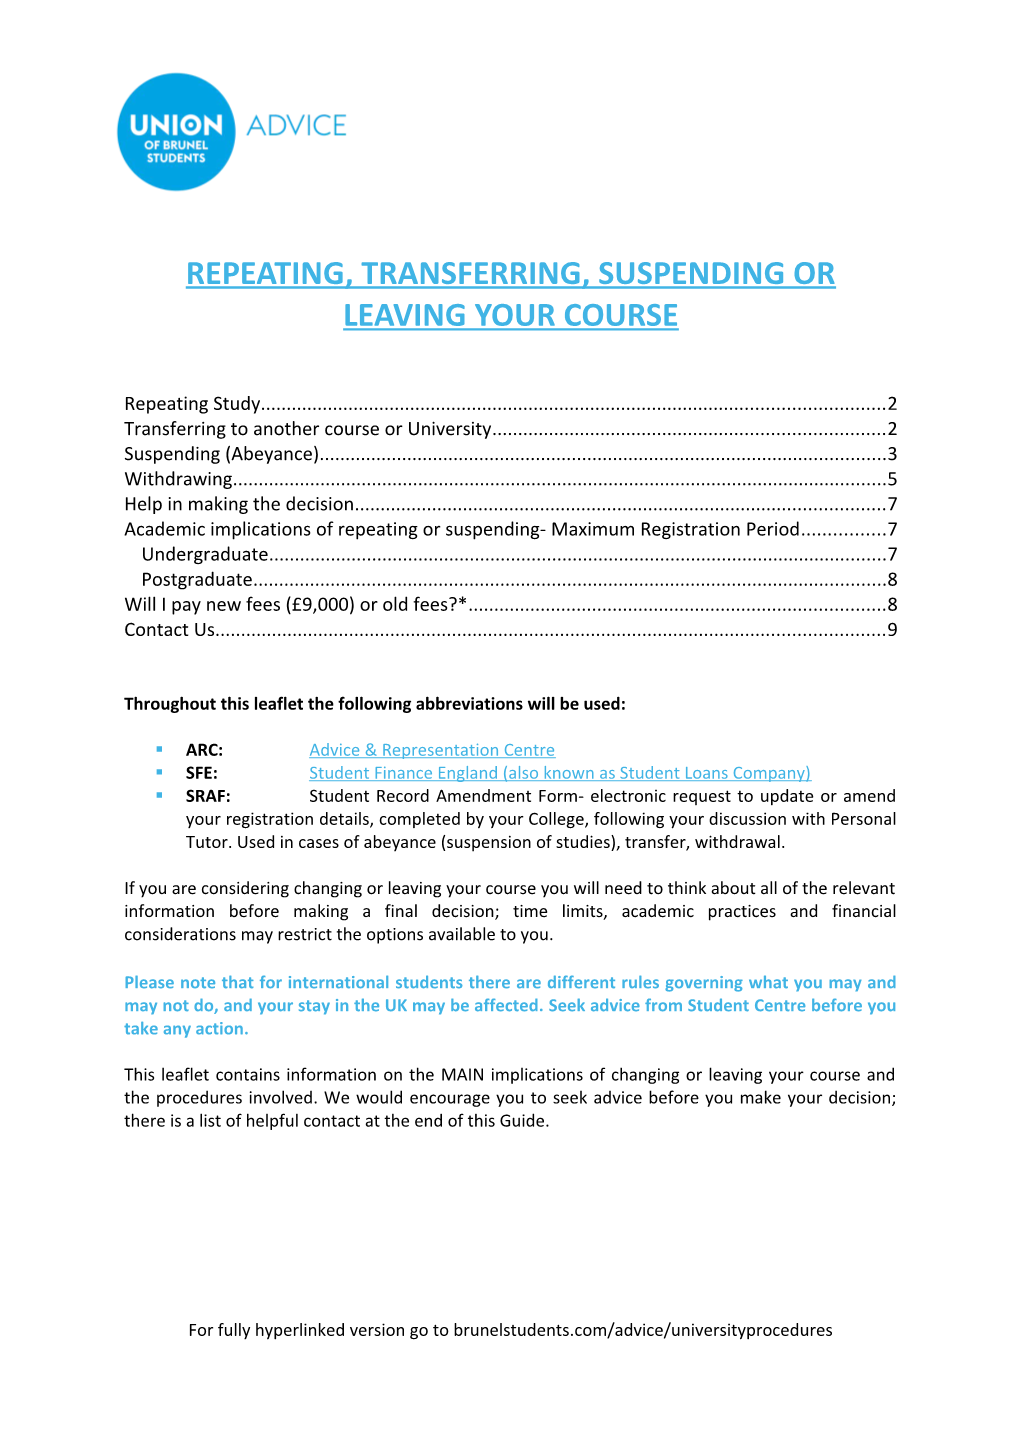 The ARC Guide to Repeating, Transferring, Suspending Or Leaving Your Course